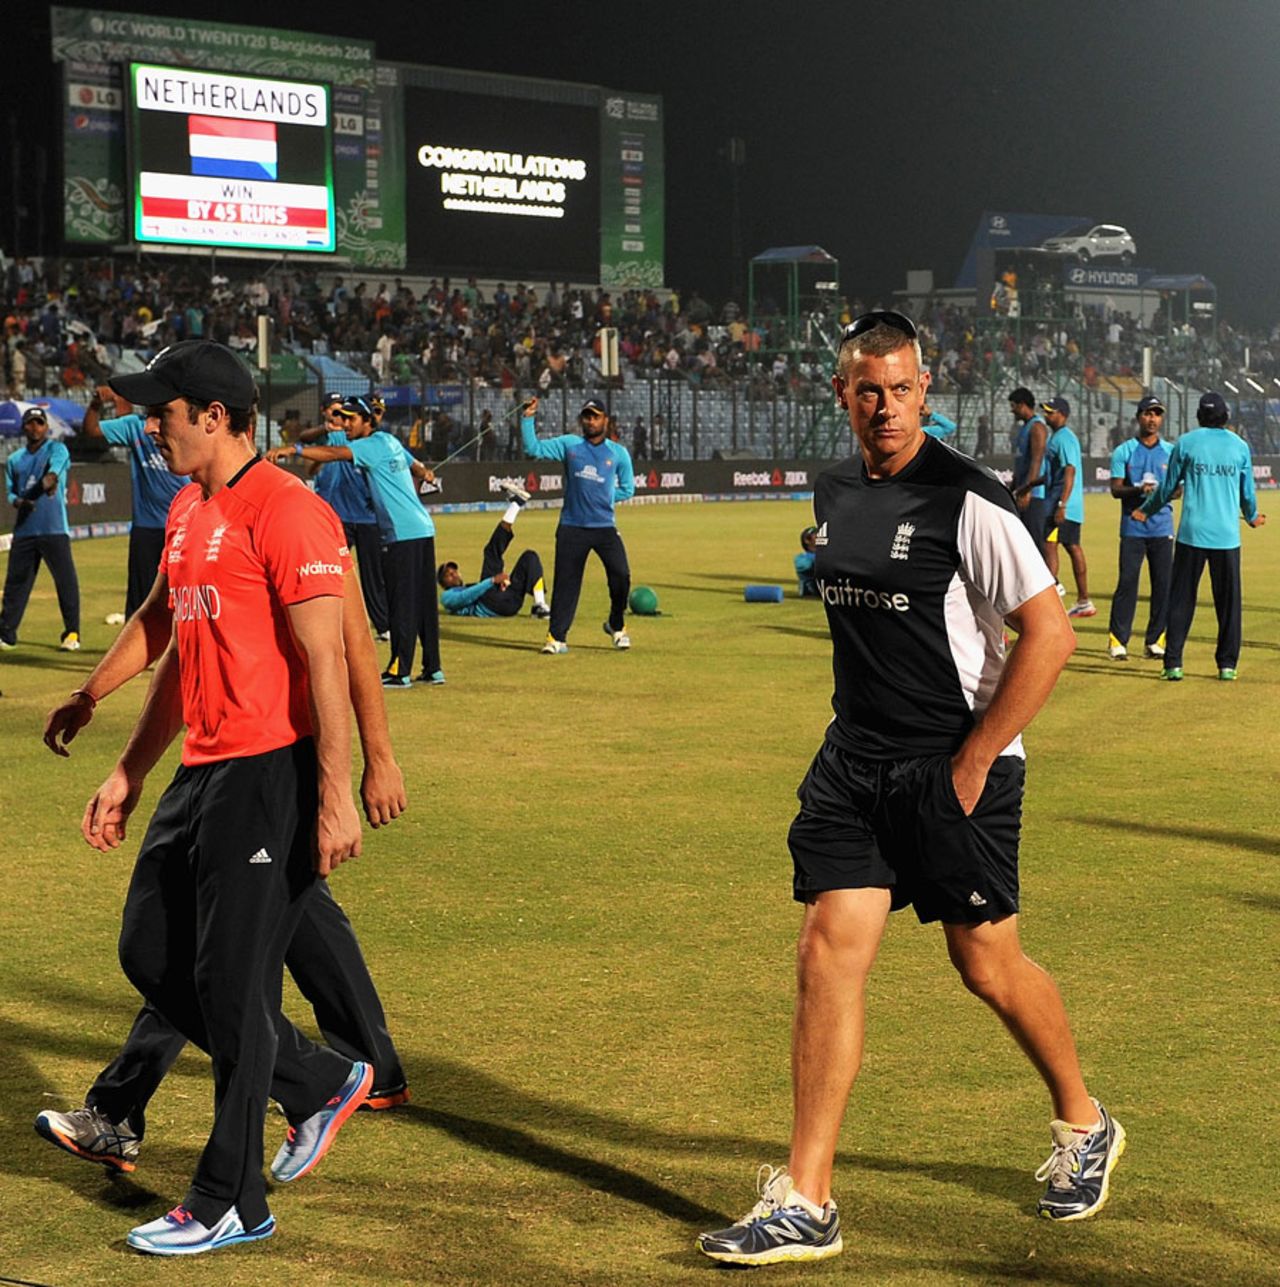 Ashley Giles slinks away from England's shambolic defeat, England v Netherlands, World T20, Group 1, Chittagong, March 31, 2014